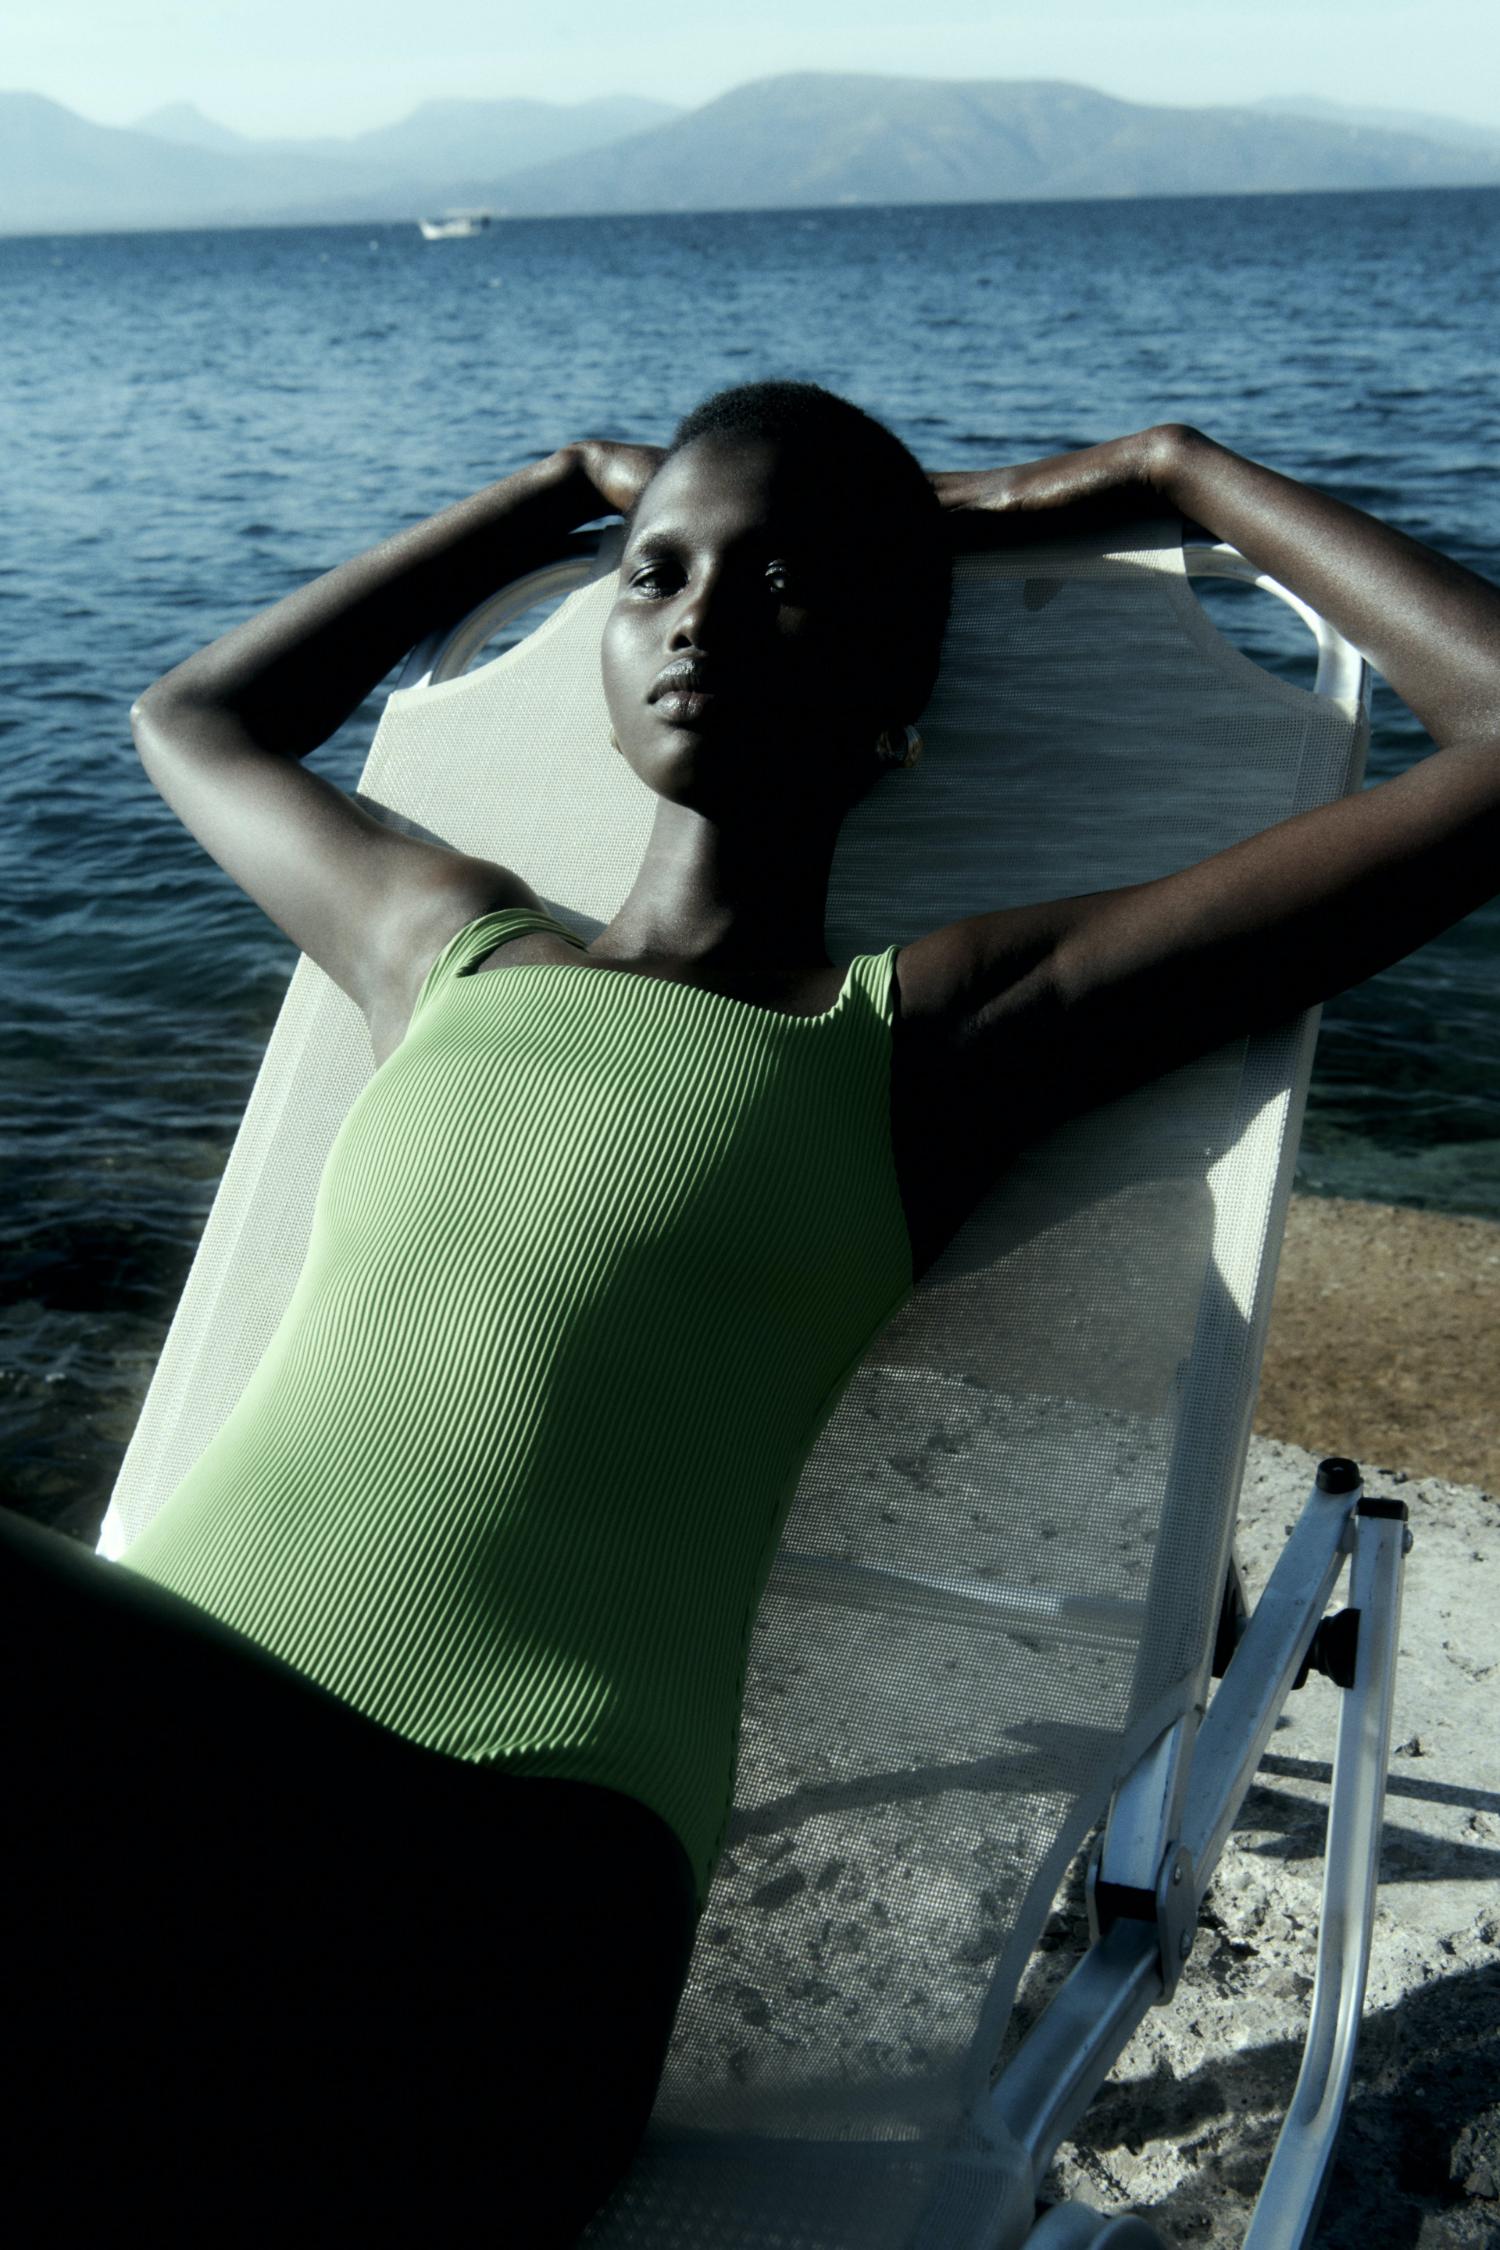 Amar Akway by Robin Galiegue for COS Summer 2021 Ad Campaign. Clothing: COS BRIGHT GREEN OPEN-BACK SWIMSUIT / COS GOLD TEXTURED HOOP EARRINGS